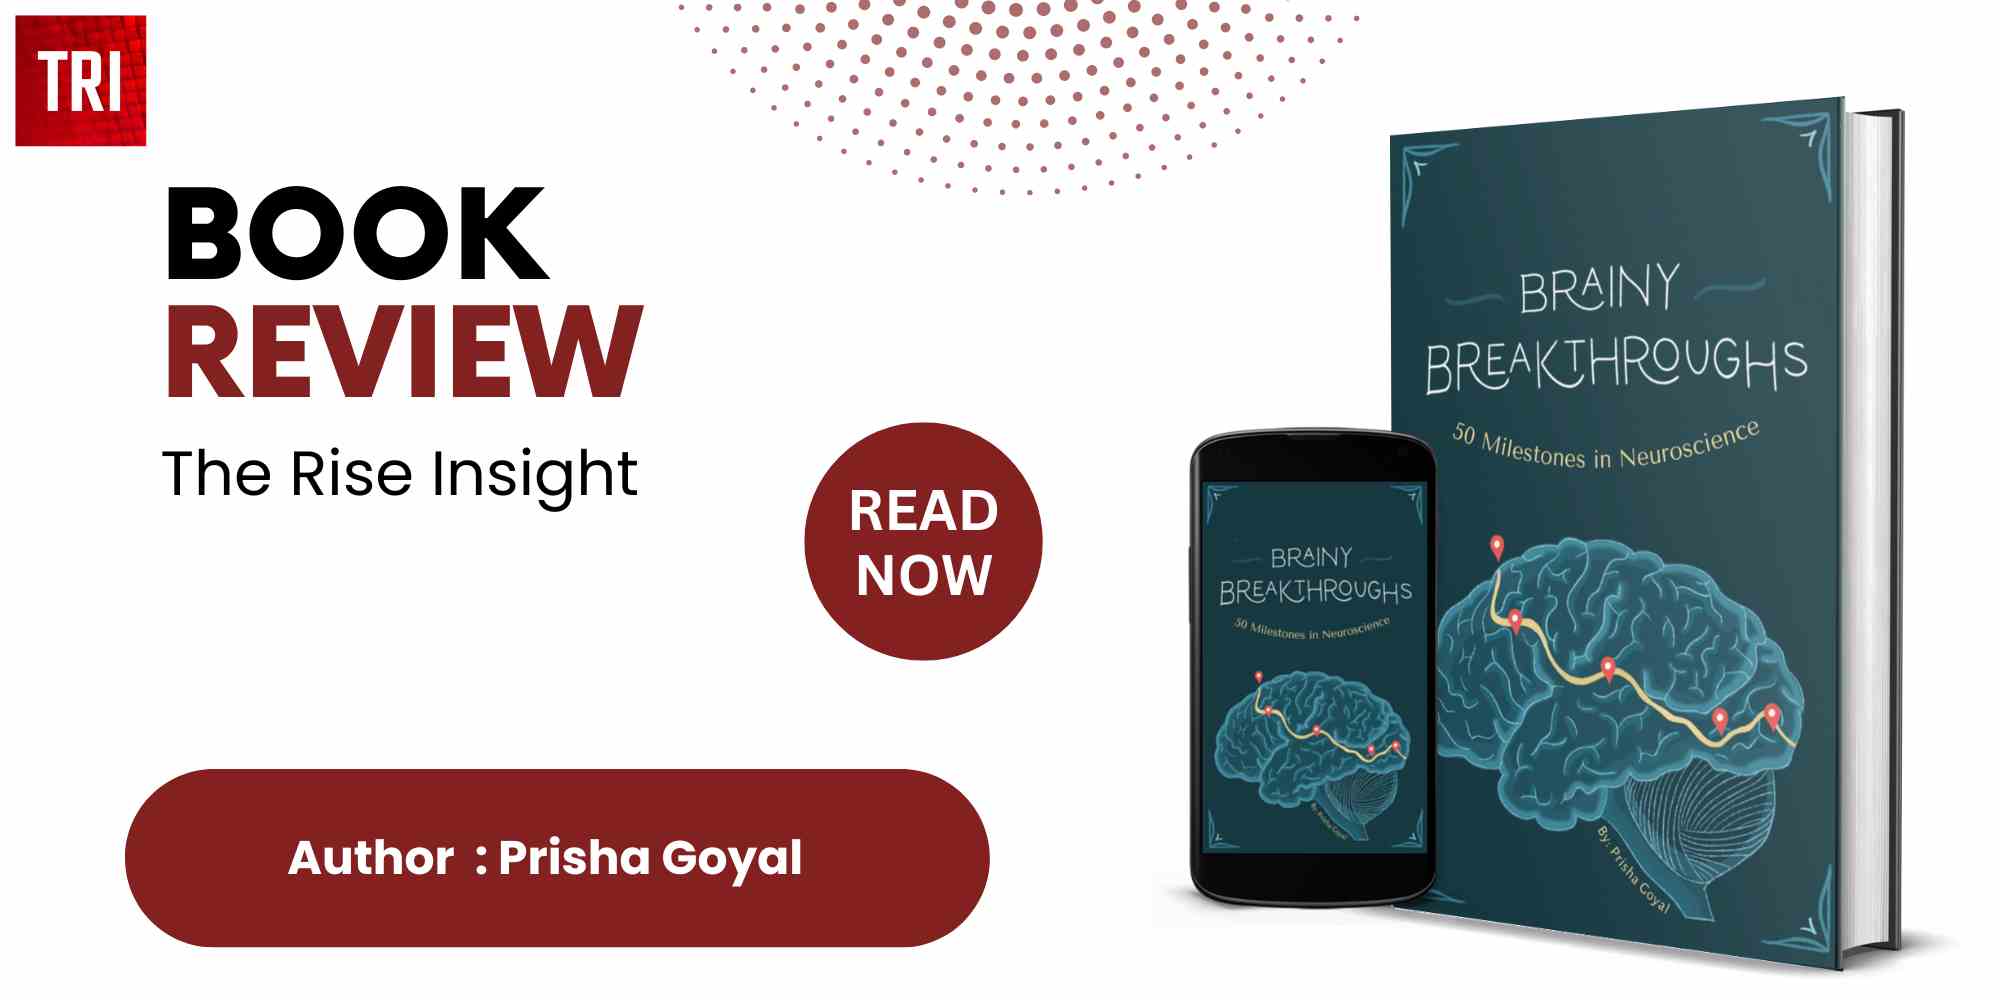 Book Review : Brainy Breakthroughs by Prisha Goyal